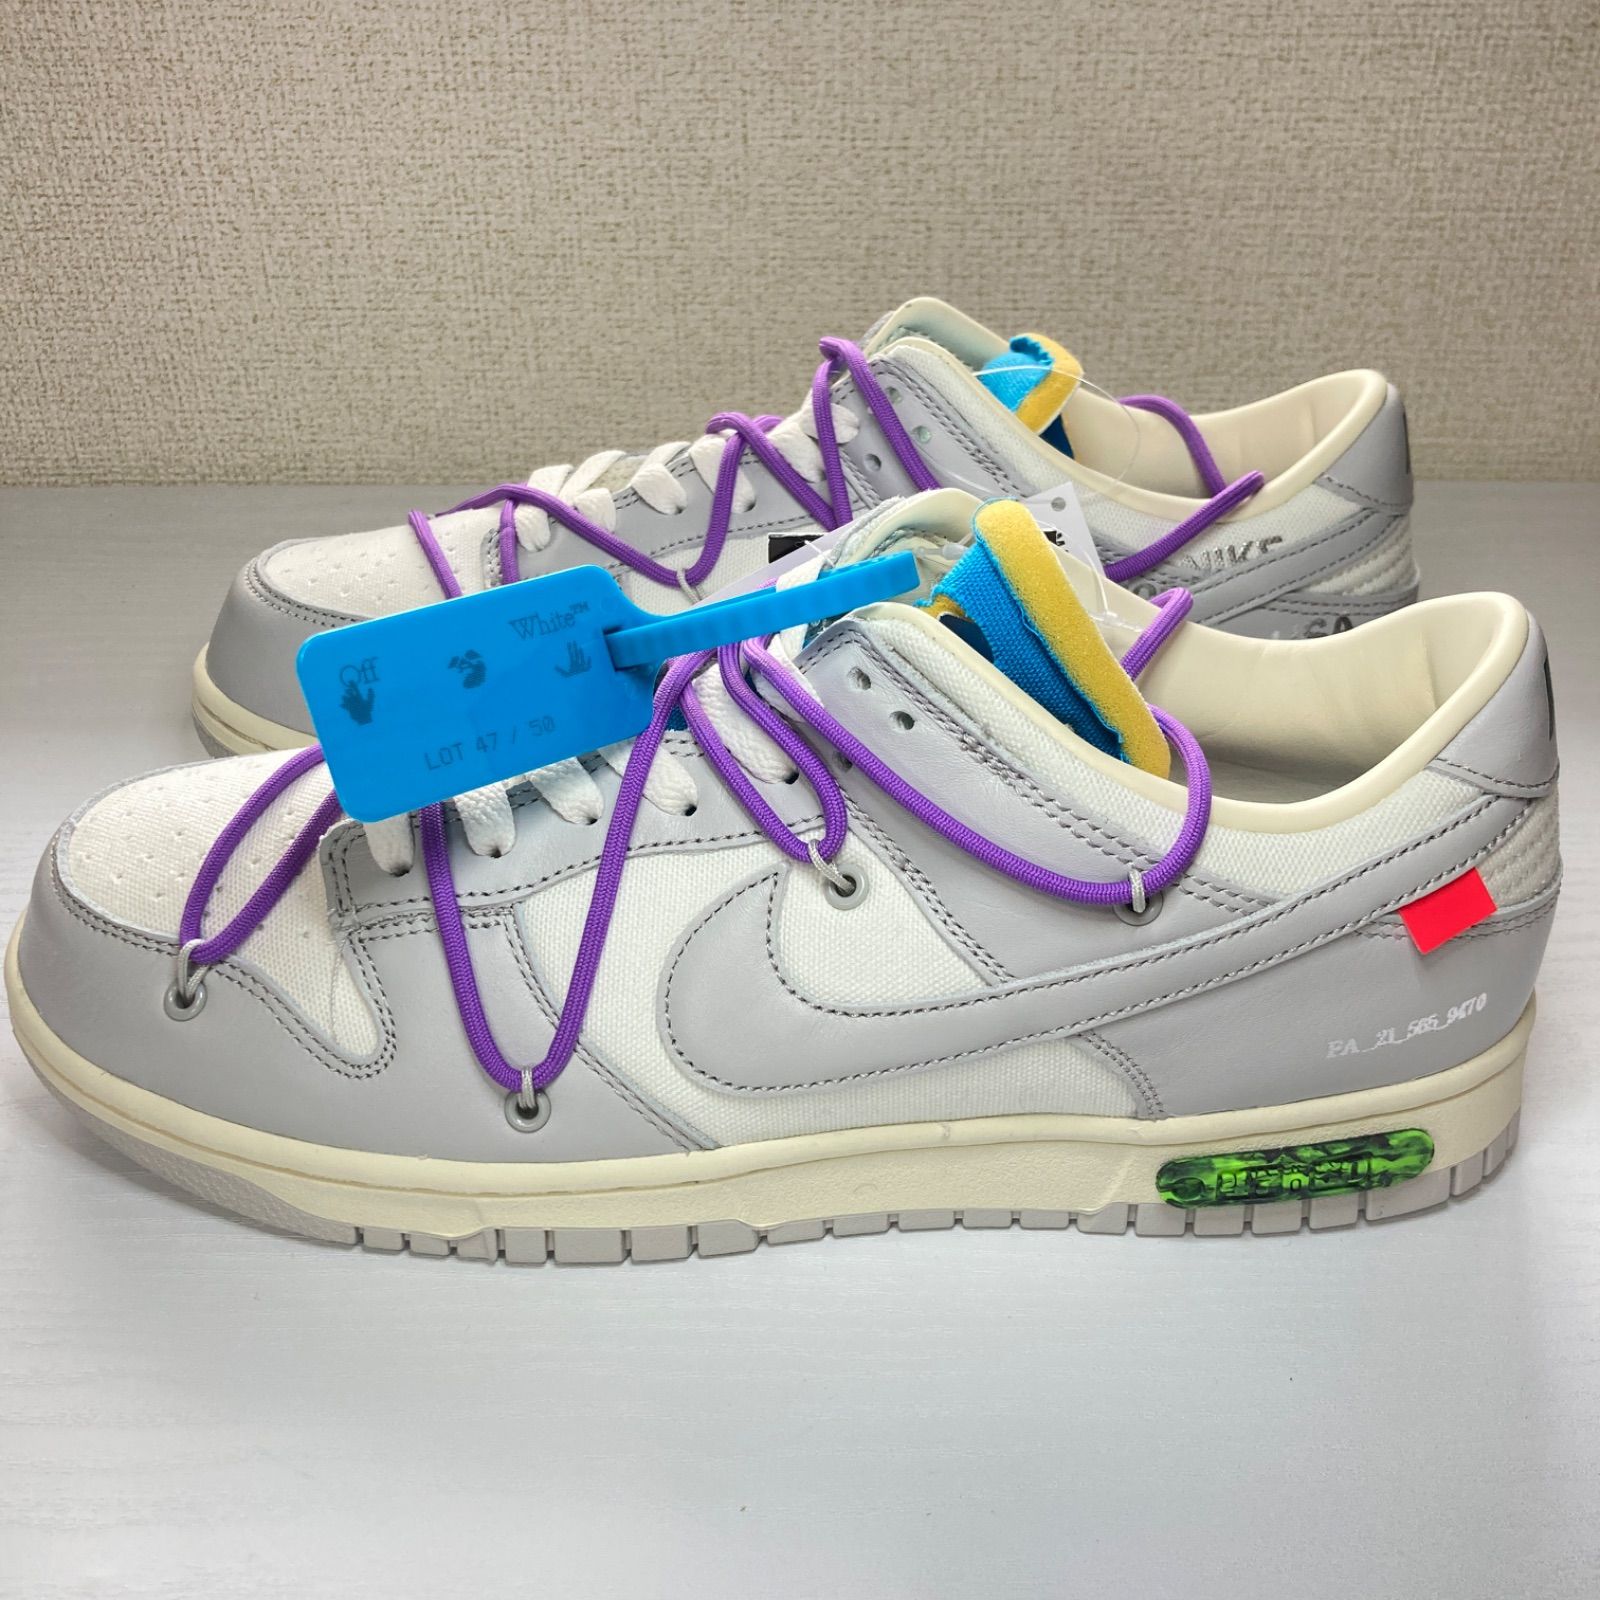 Off-White × NIKE ダンク ロー "The50" Lot47